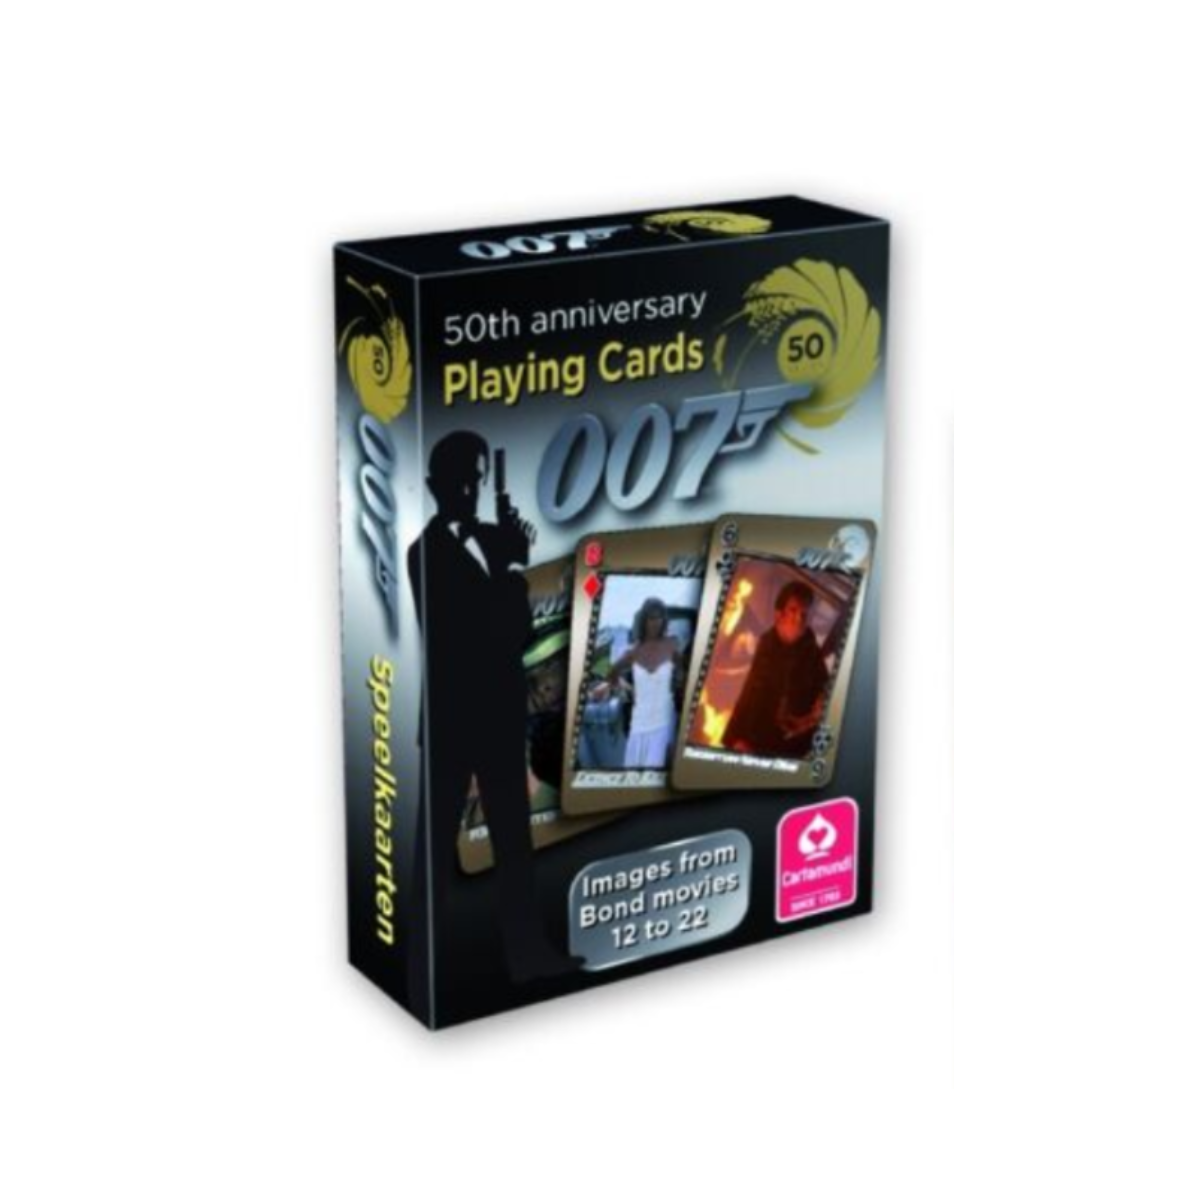 James Bond 50th Anniversary Playing Cards with Images from Bond Movies-Silver 12 To 22-Cartamundi-Ace Cards &amp; Collectibles